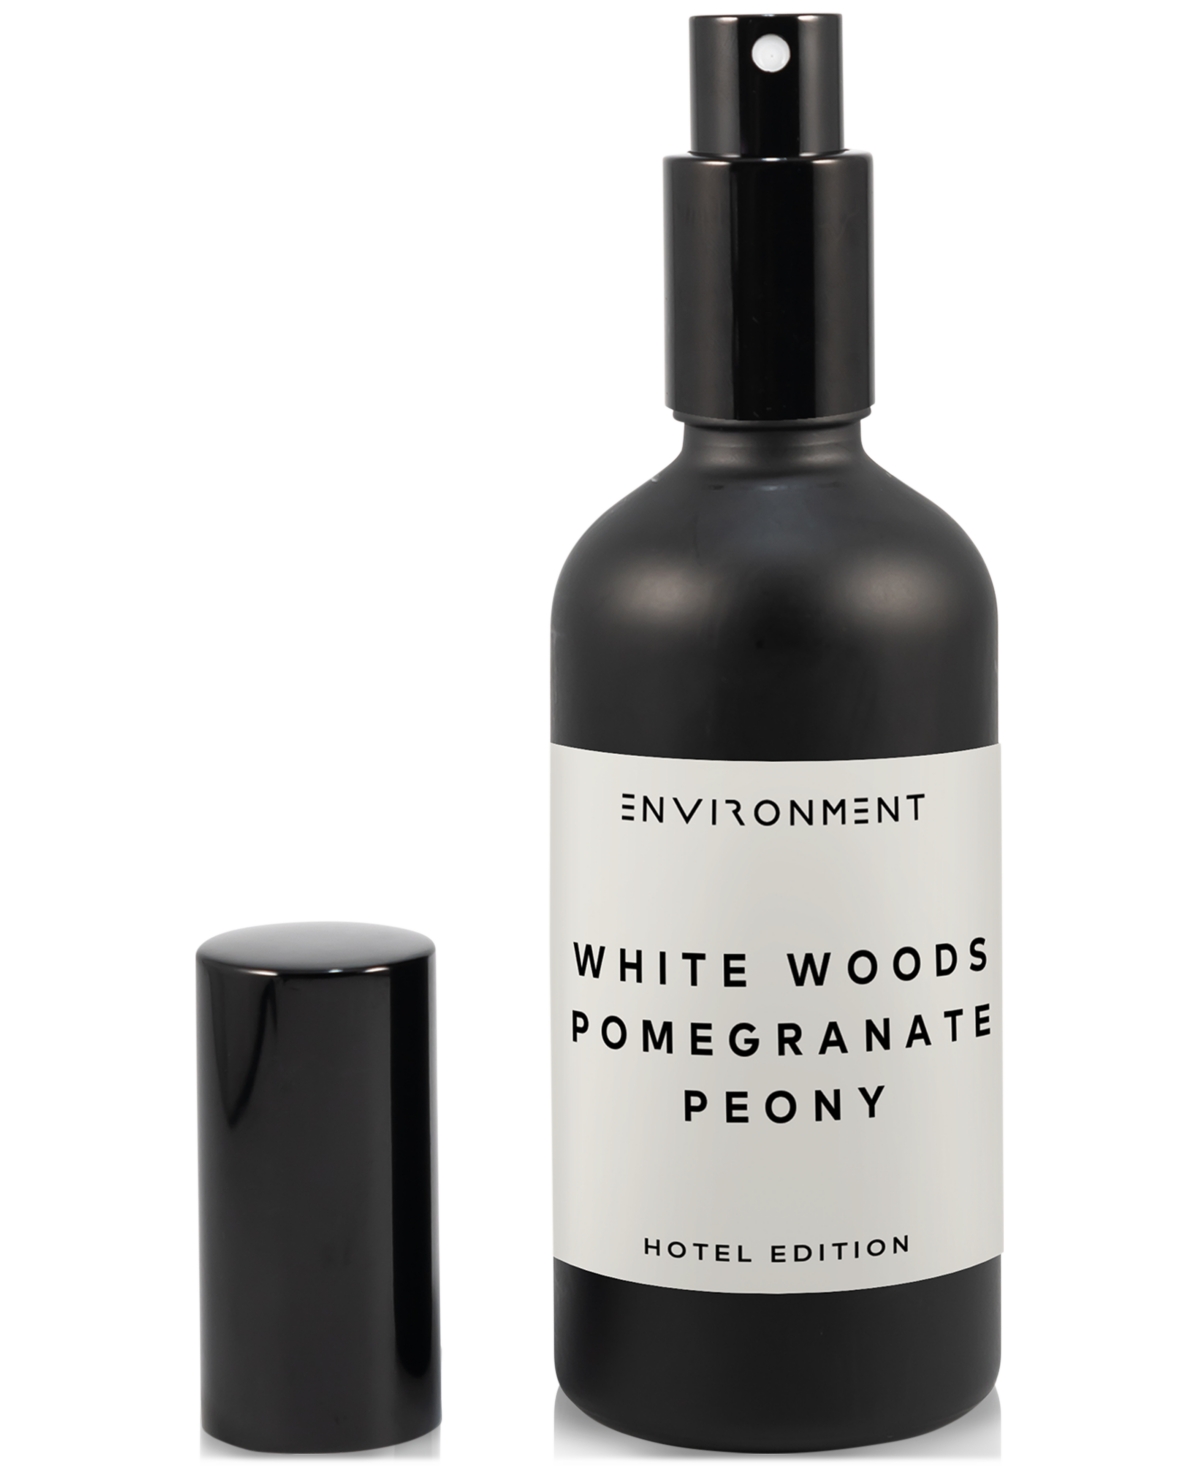 White Woods, Pomegranate & Peony Room Spray (Inspired by 5-Star Luxury Hotels), 3.4 oz.